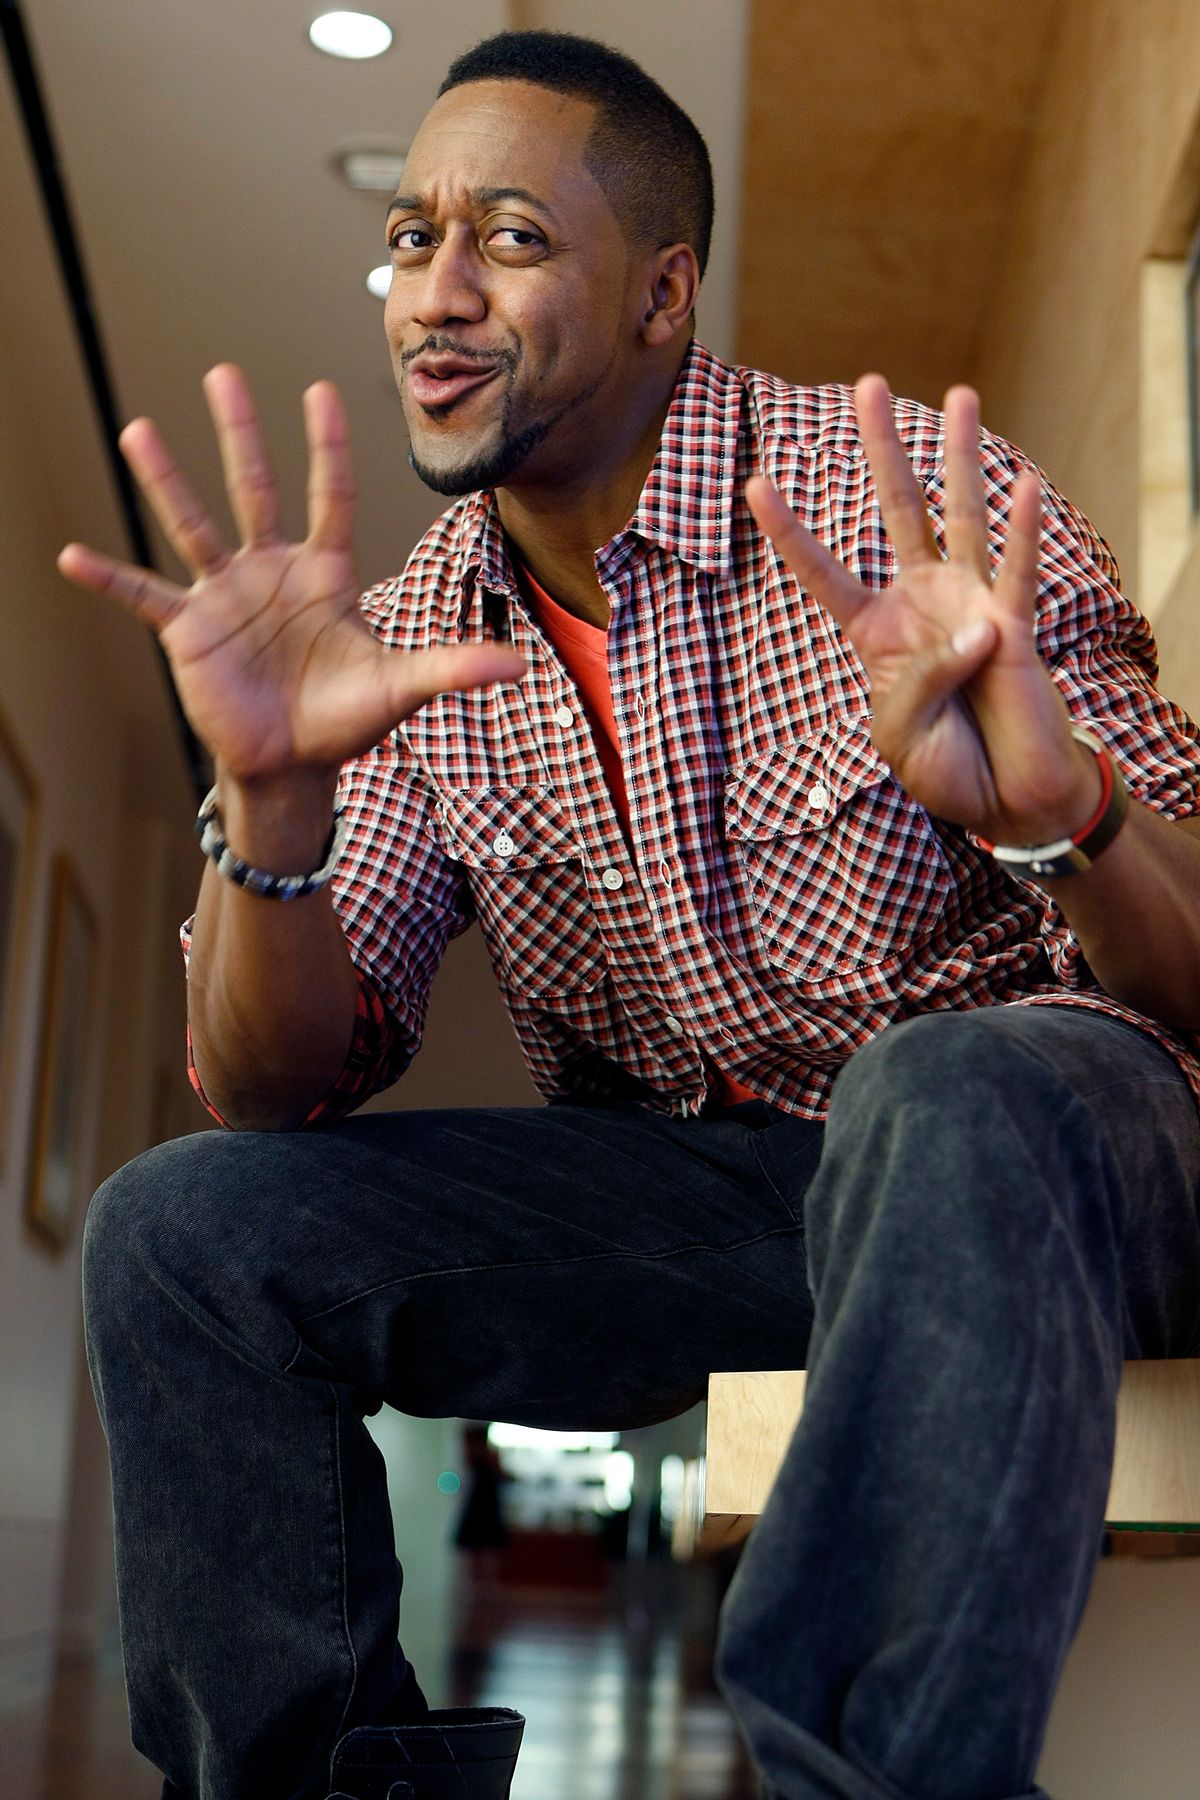 Actor Jaleel White is best known for his role as Steve Urkel, the nerd on the sitcom Family Matters, which aired for 9 seasons. White has not been able to shake being typecast by the role, but he hopes a new series he is starring in on the Web will win acceptance with audineces who just see him as one character. White says he not worried about typecasting, but is more worried about the lack of role for Monirity Actors.  (Photo by Kirk McKoy/Los Angeles Times via Getty Images) (Kirk McKoy/Los Angeles Times via Getty Images)